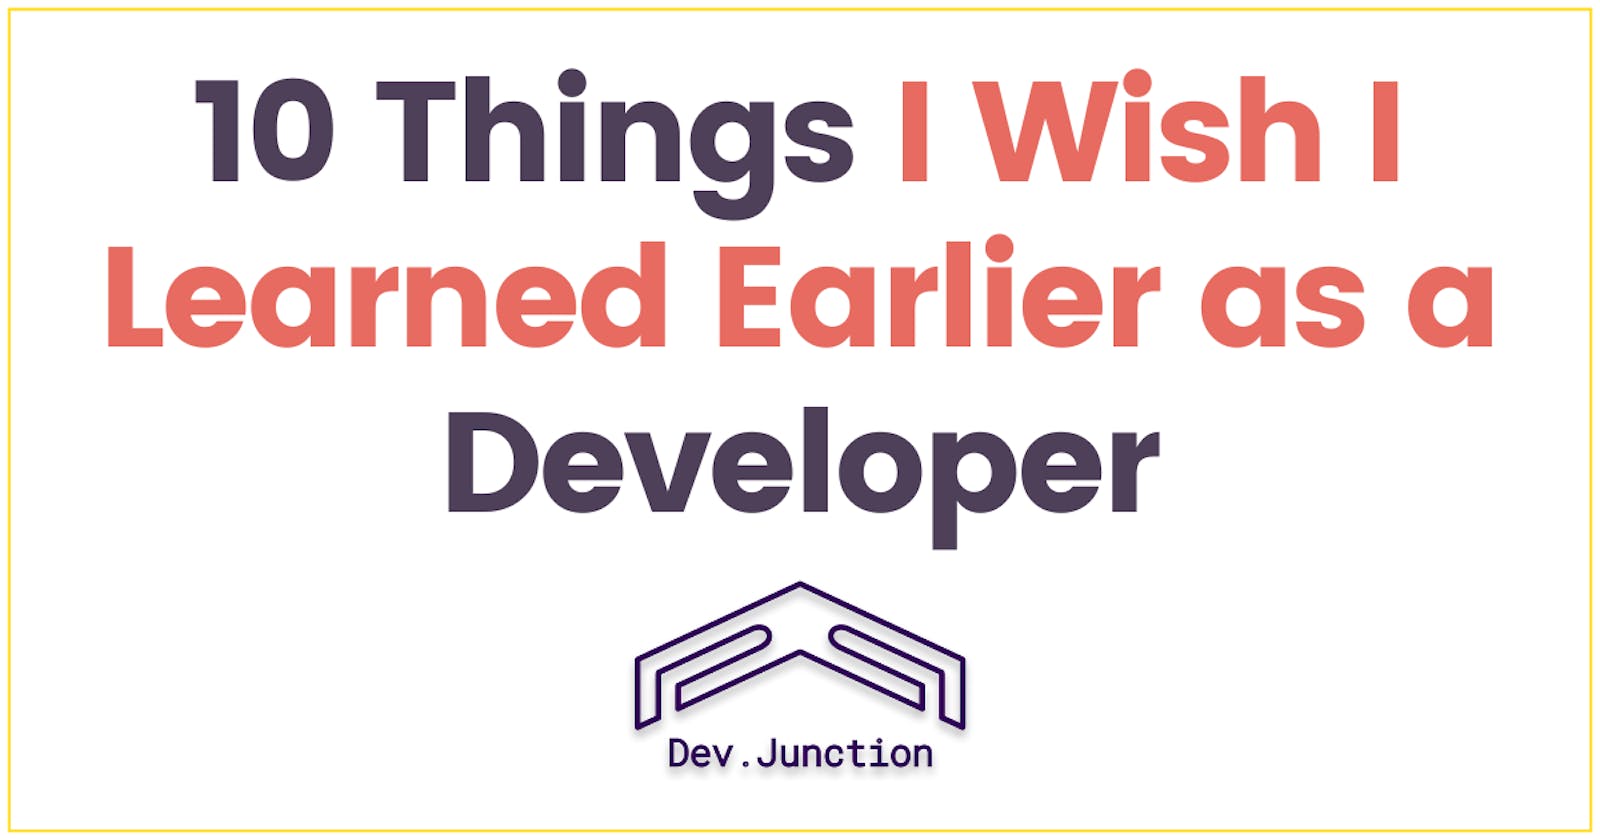 10 Things I Wish I’d Learned Earlier as a Software Developer